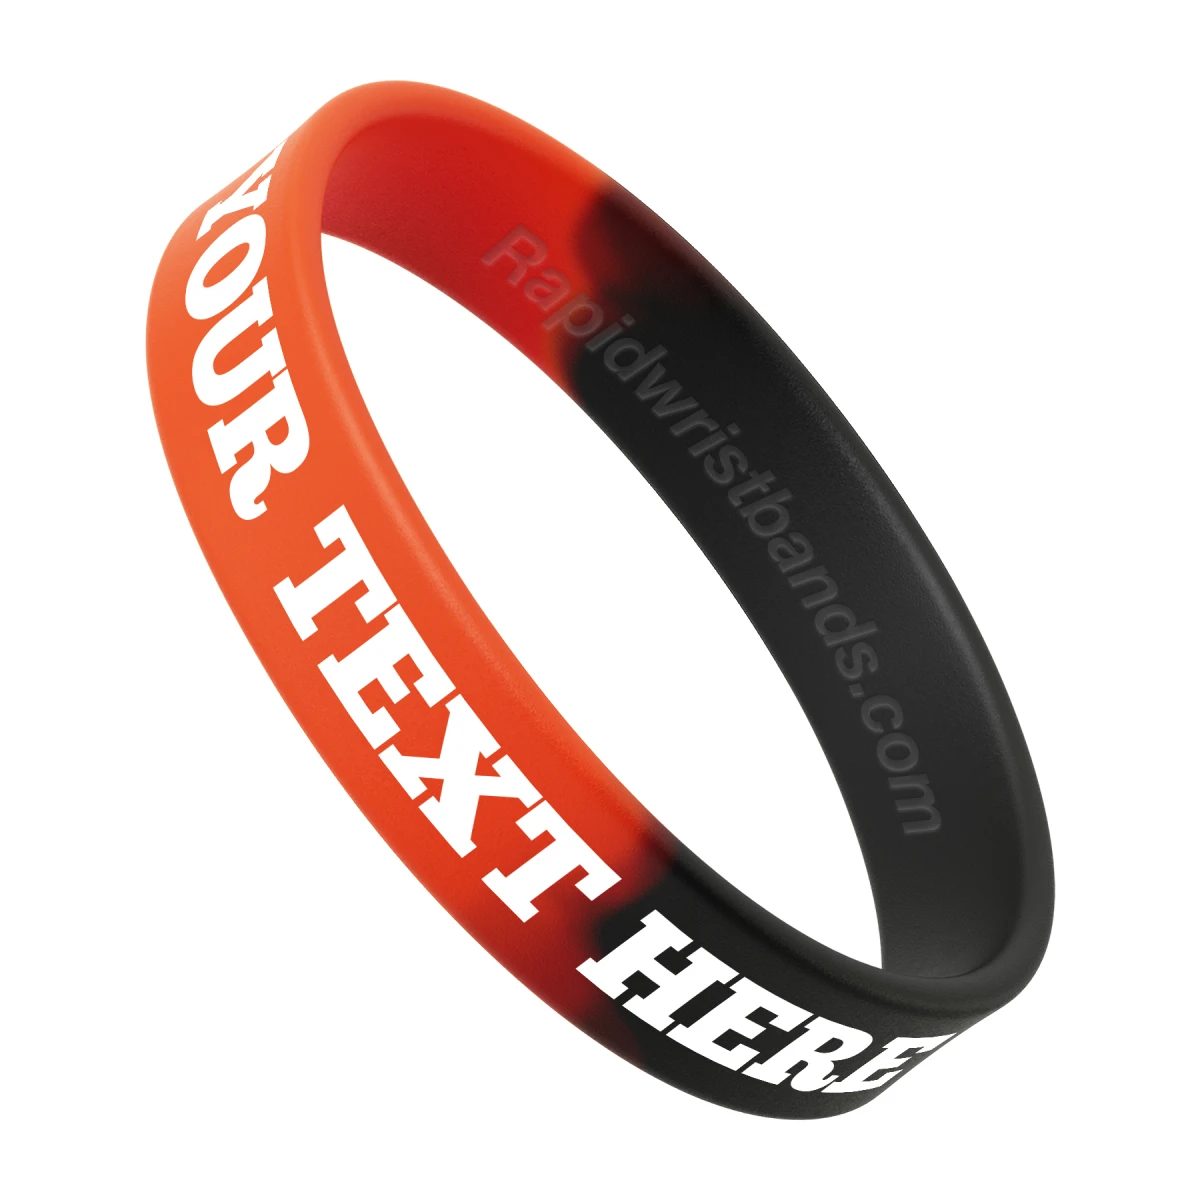 Segmented Orange/Black Wristband With Your Text Here Printed In White